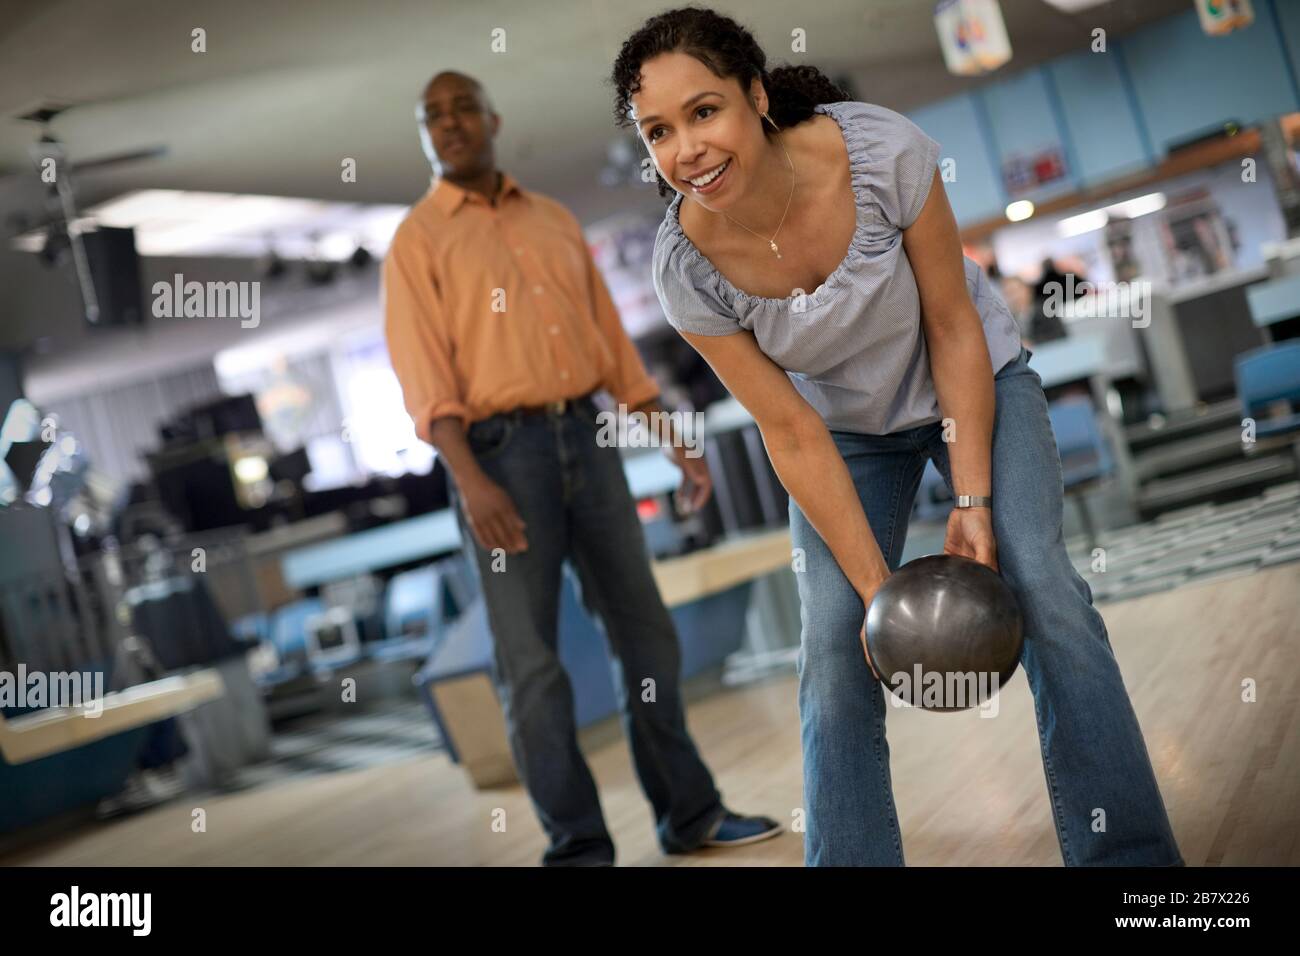 Smiling mid adult woman throwing a bowling ball. Stock Photo